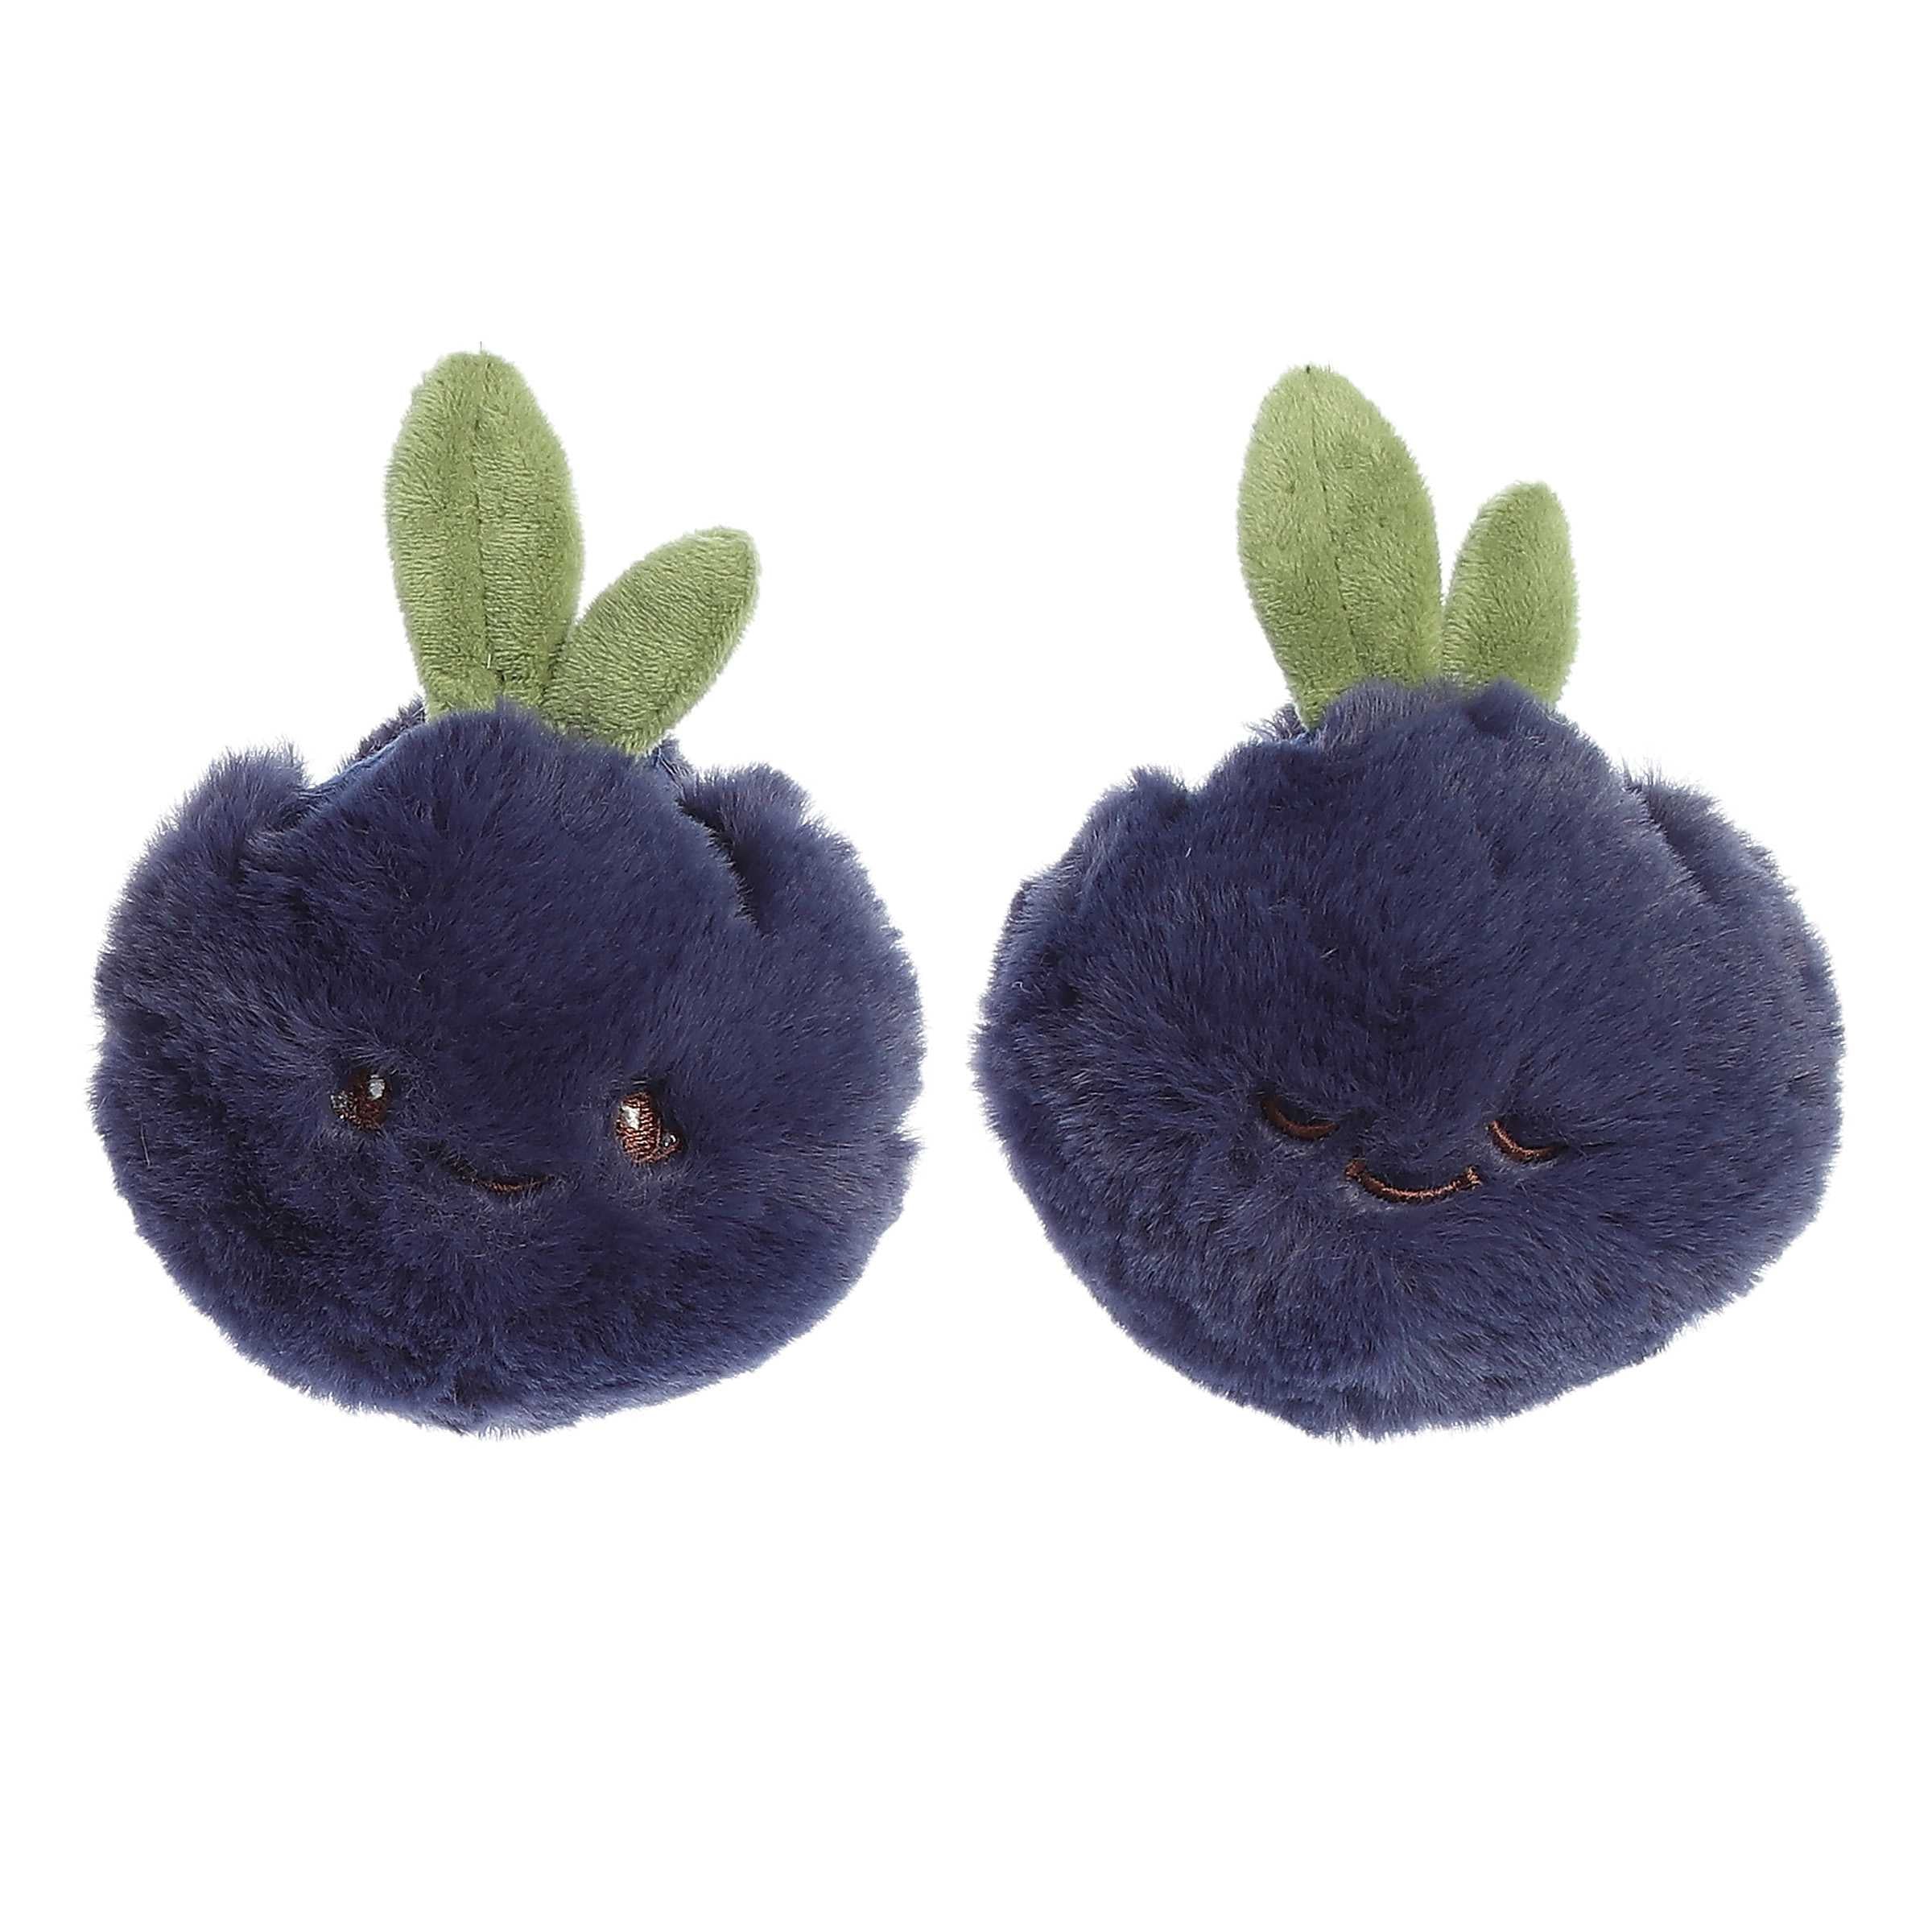 Playful Blueberry plush toy set with blueberry rattle and slice crinkle, designed with soft purple fur and green leaf